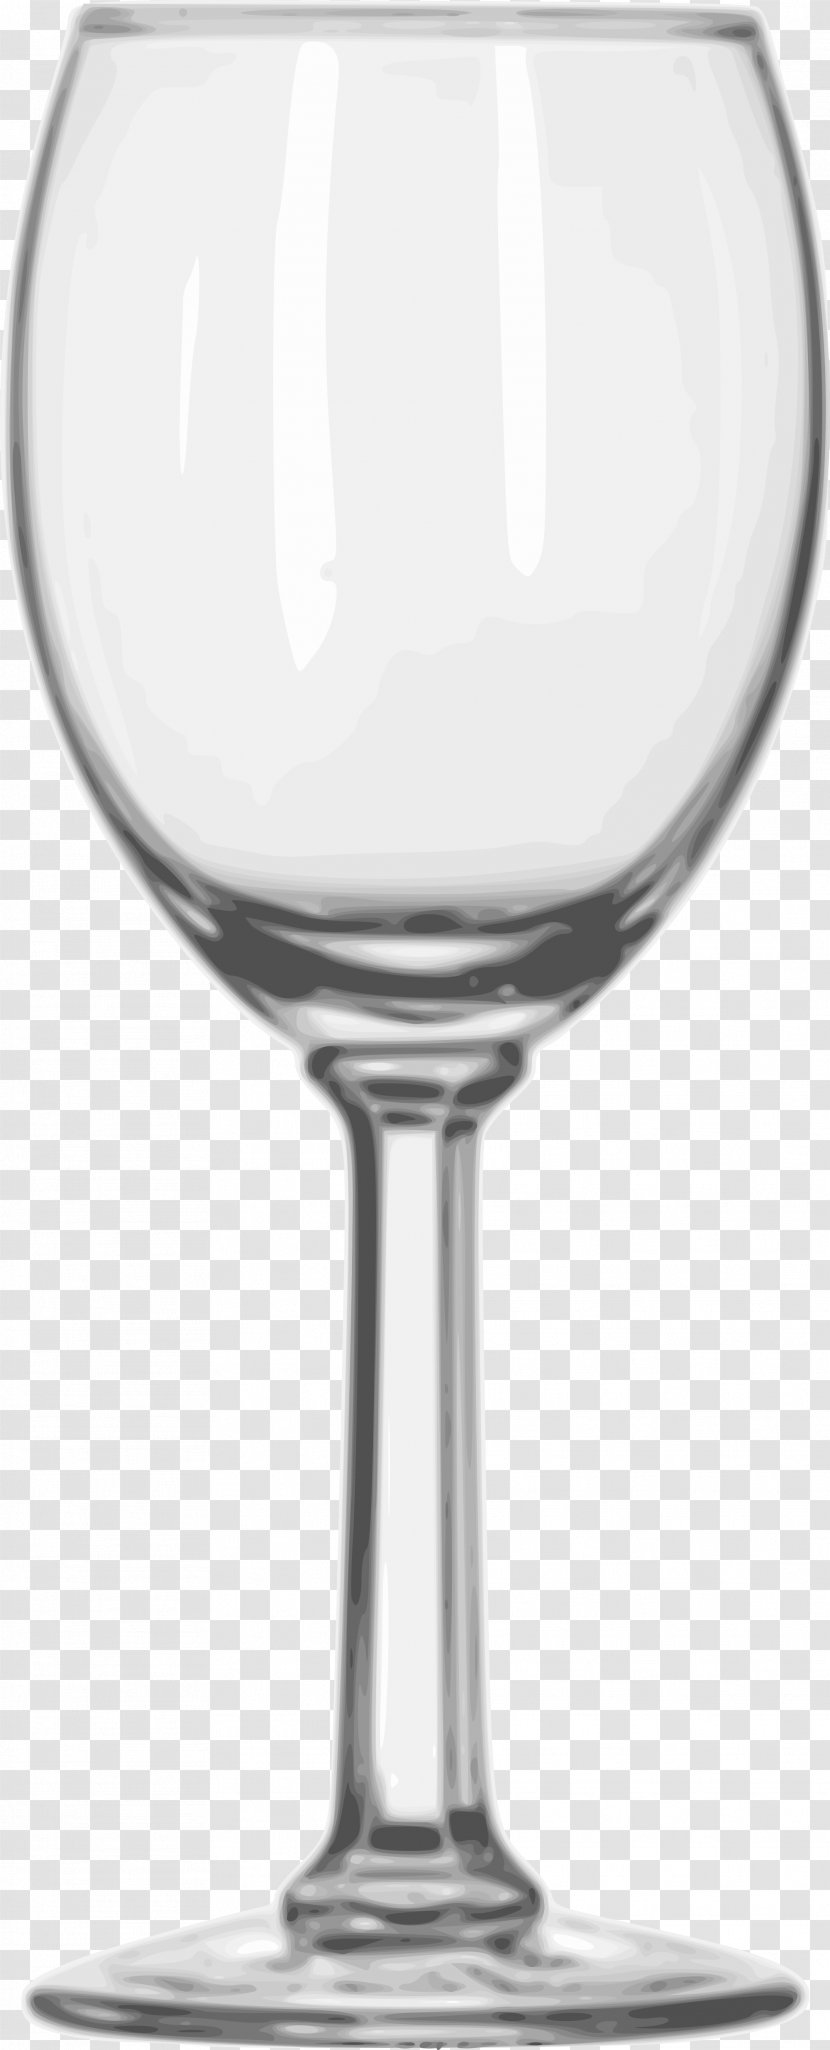 Wine Glass Cocktail White - Tableware - Wineglass Transparent PNG